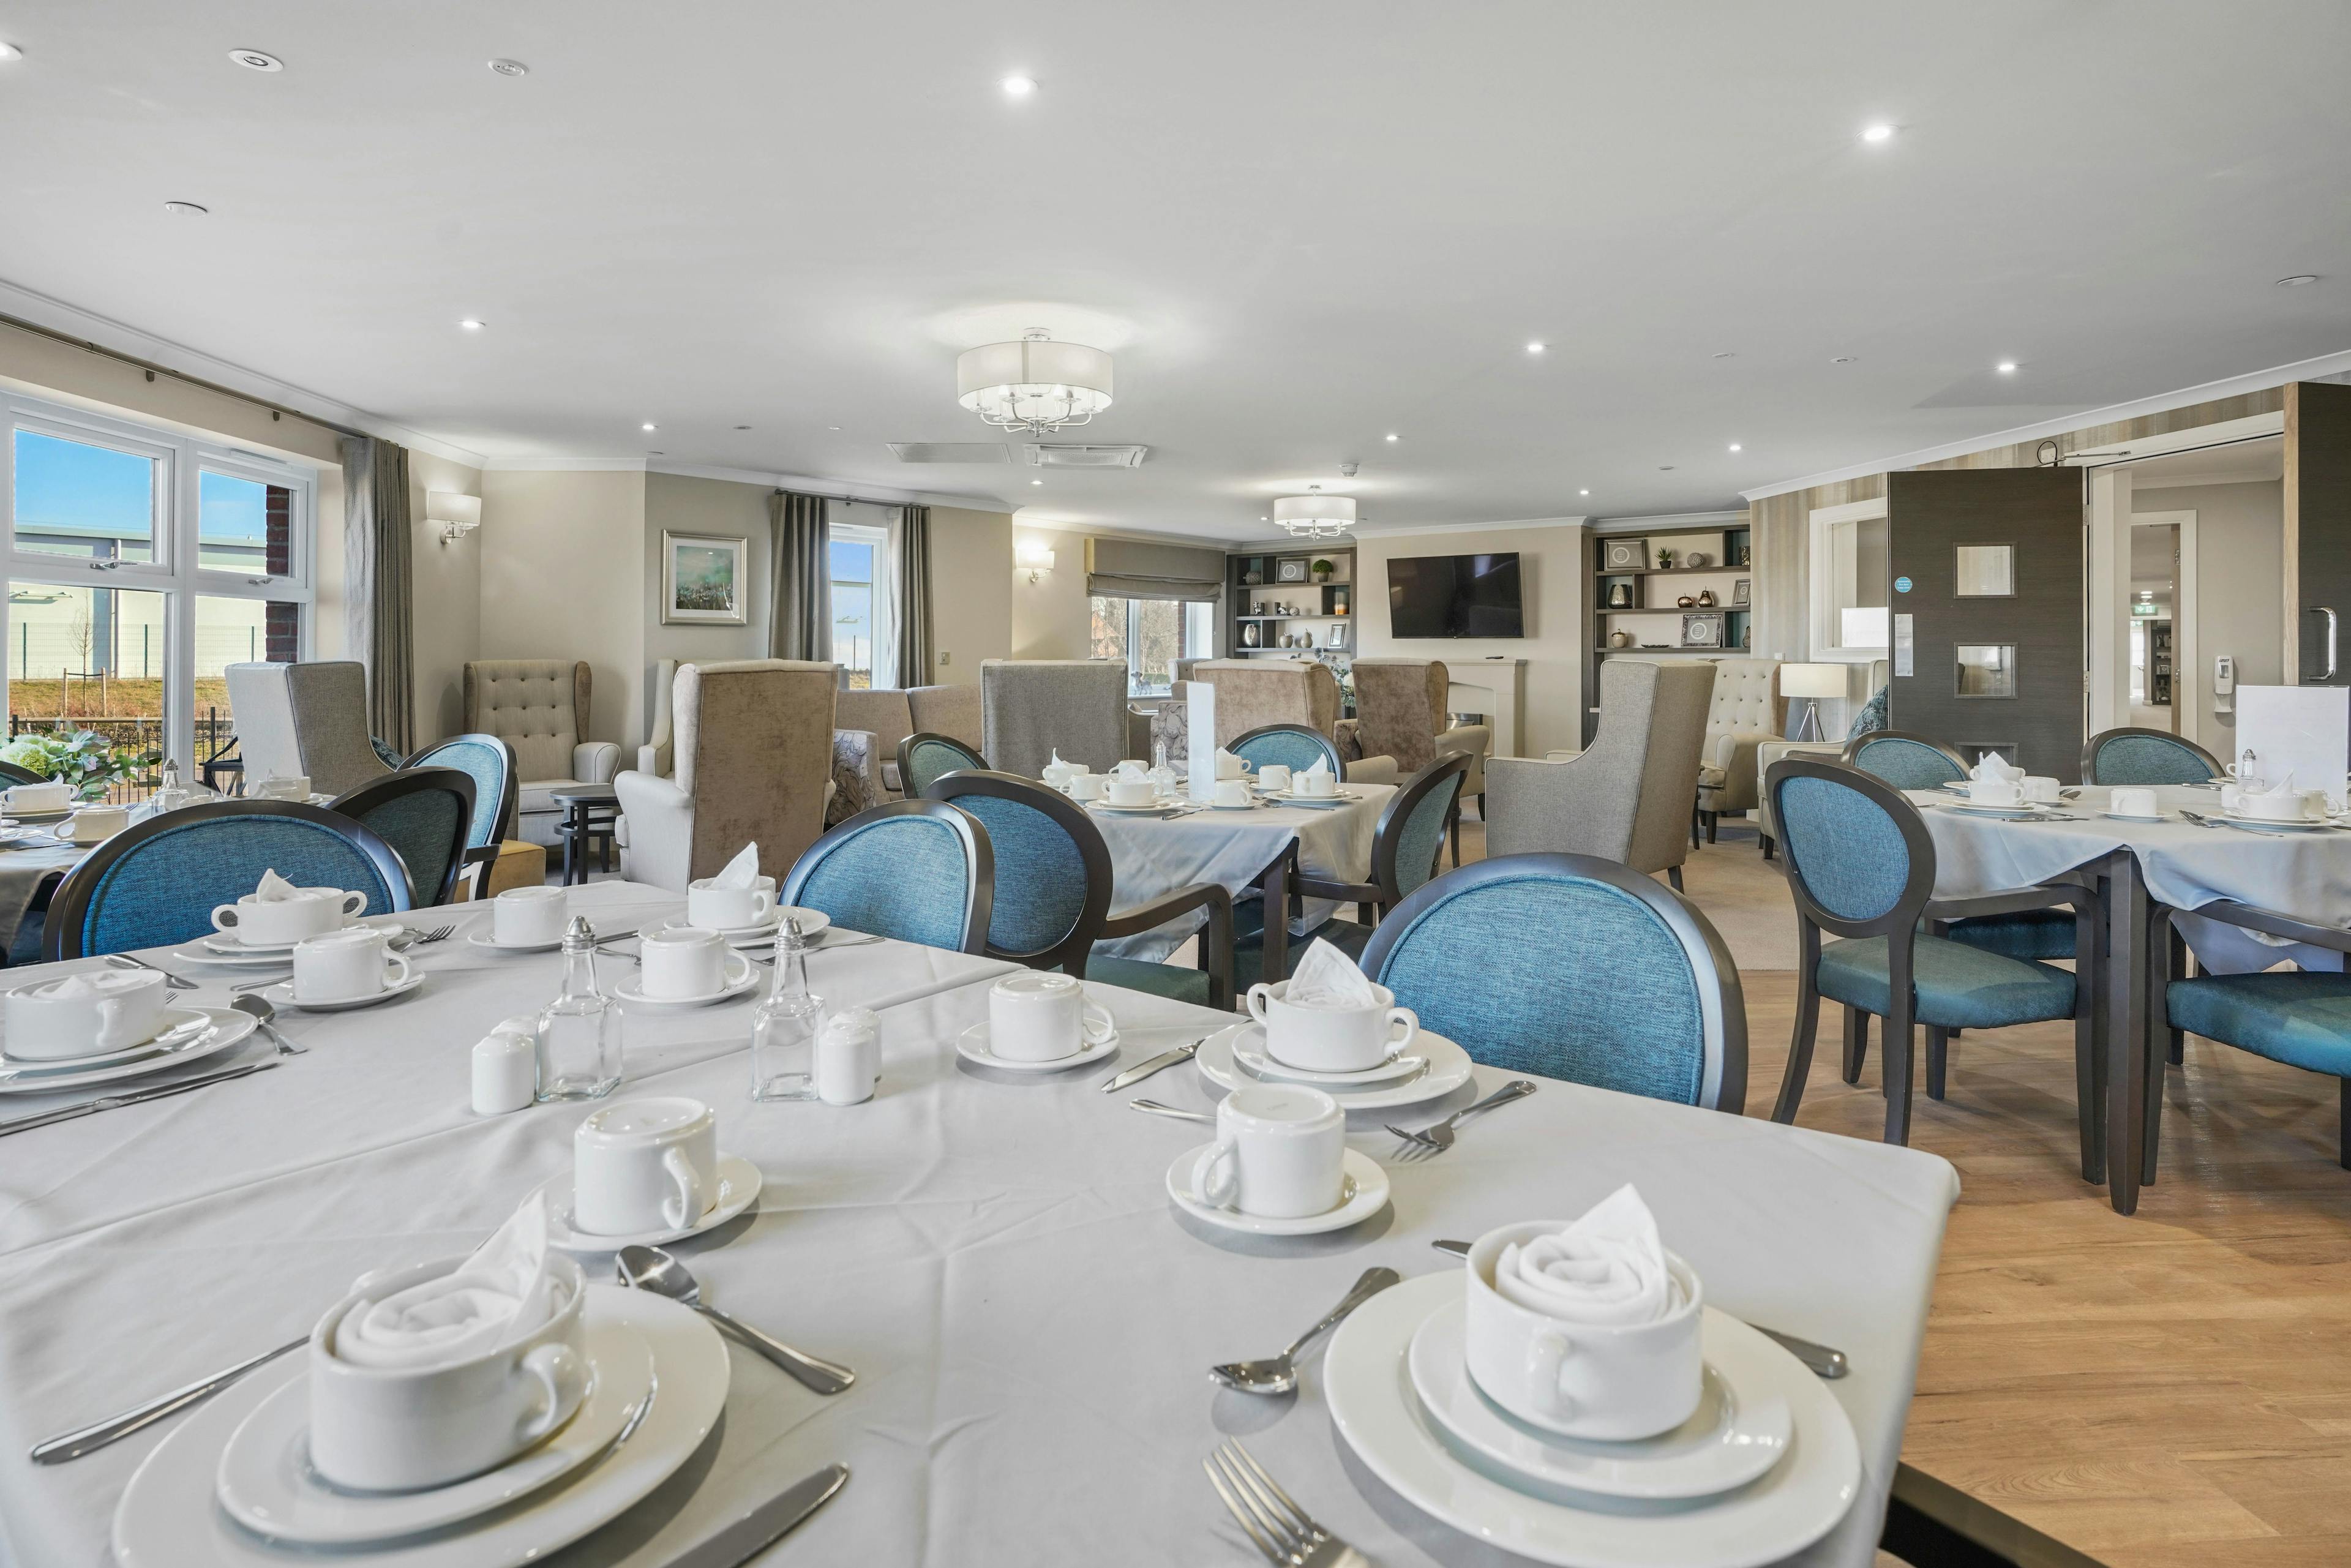 Dining room  of Tanglewood care home in Horncastle, Lincolnshire